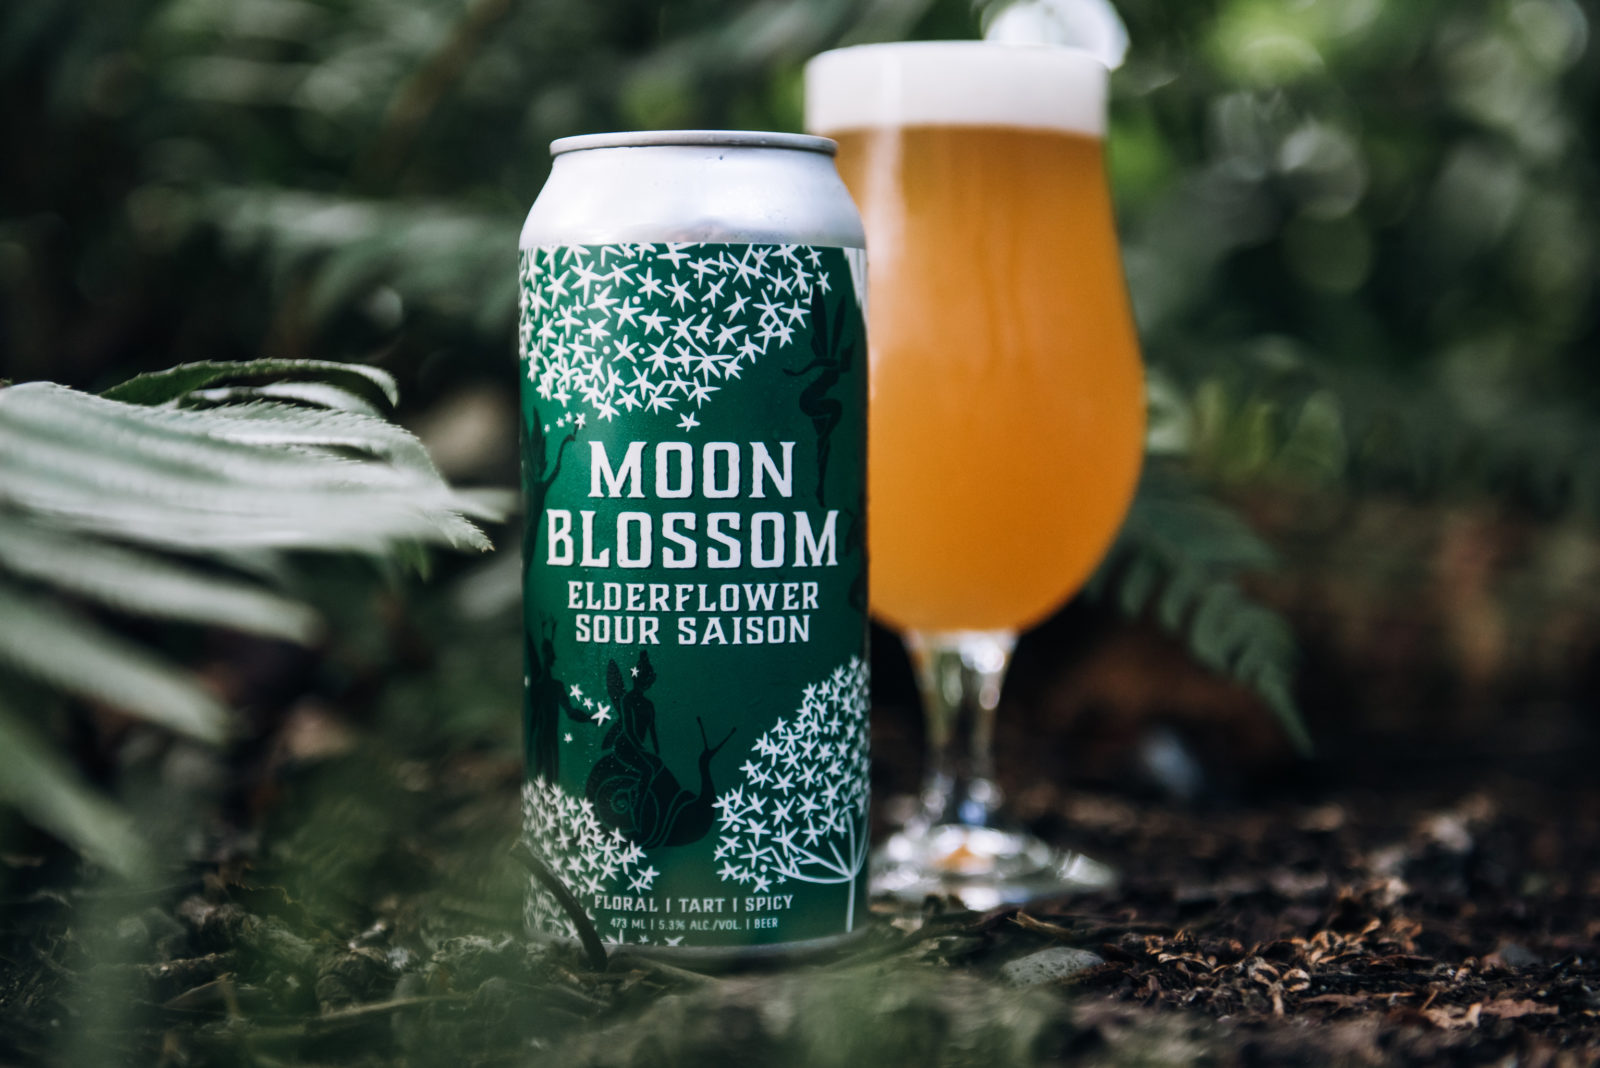 Moon Blossom by Strange Fellows Brewing